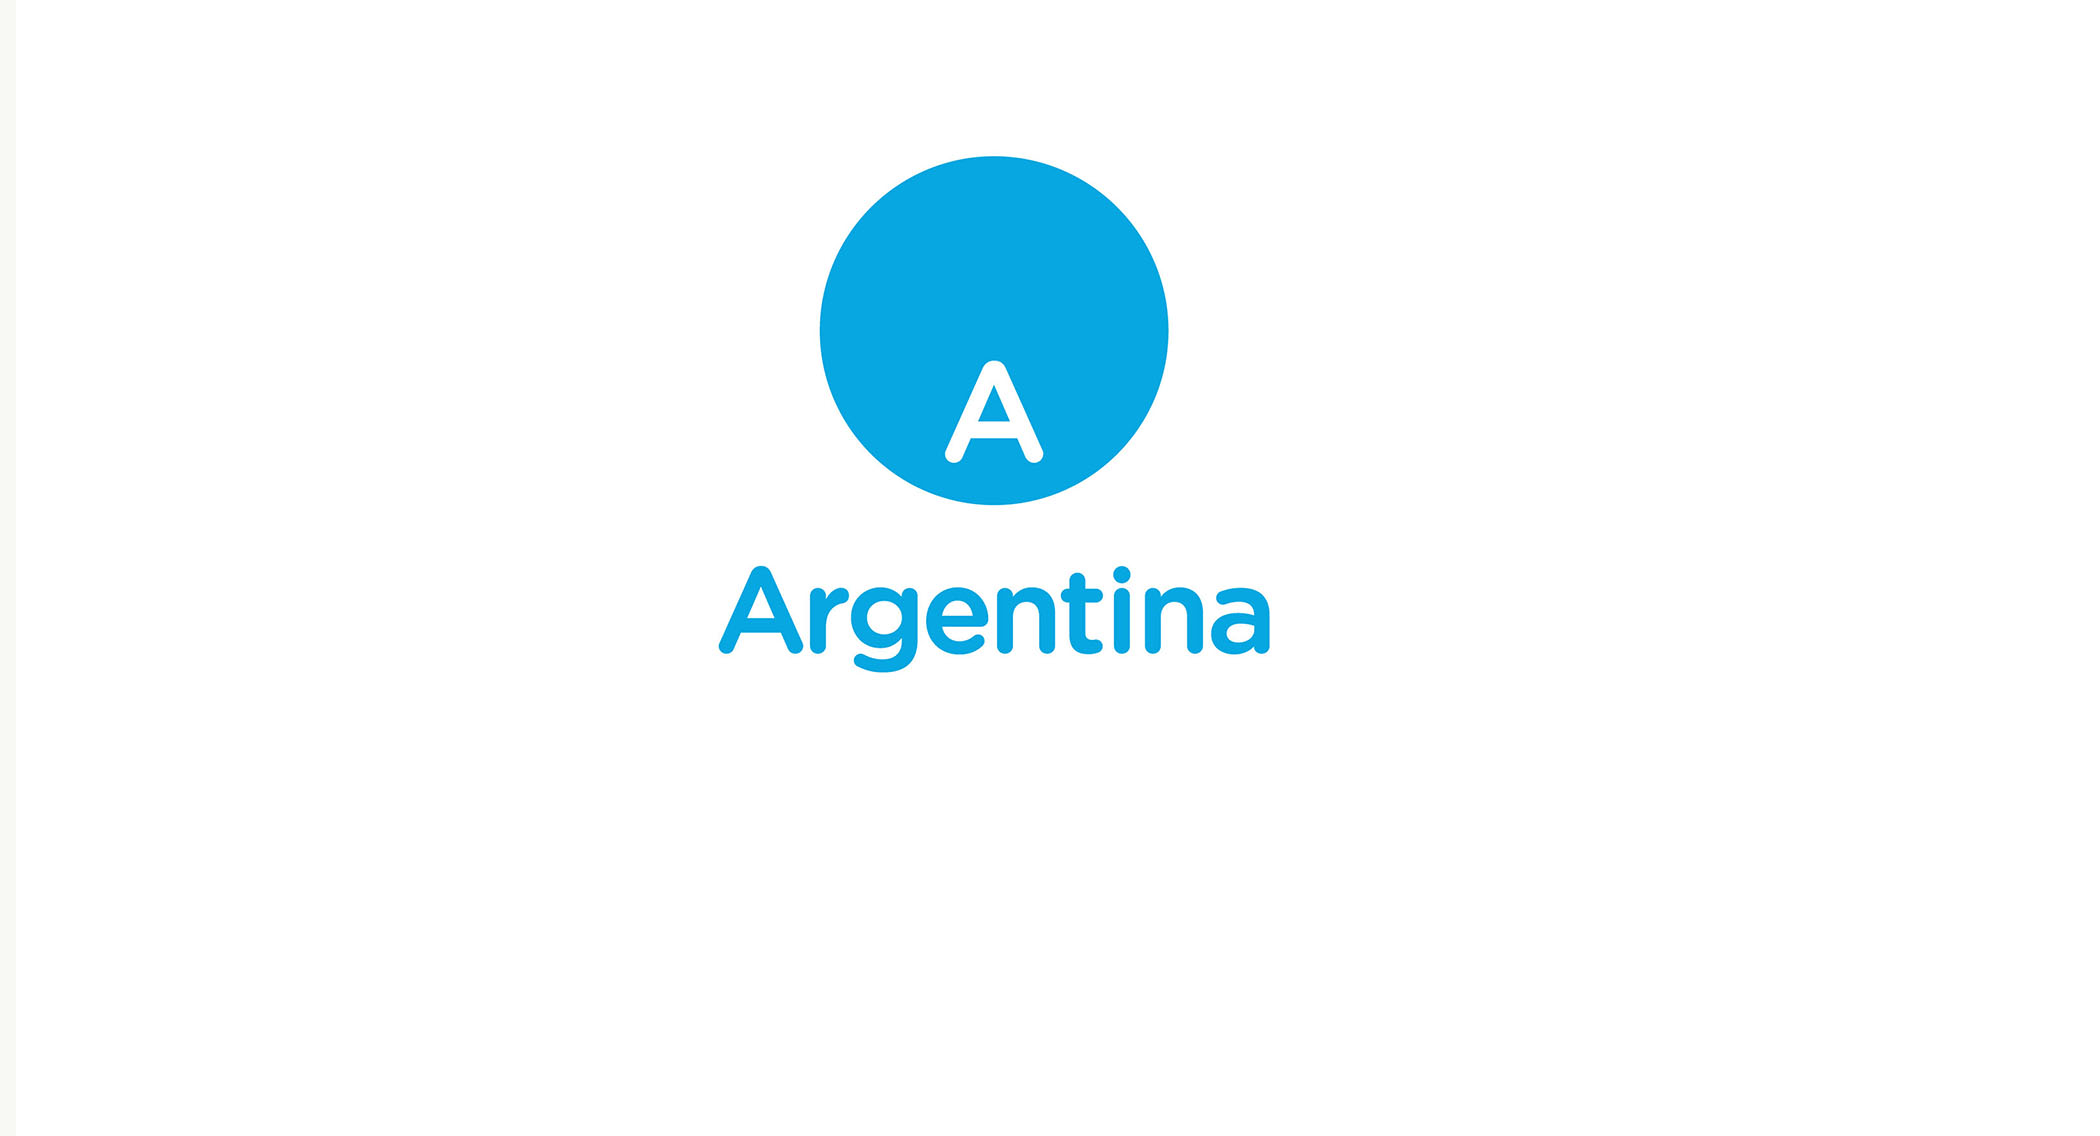 Argentina launches new country branding with a modern logo representing integration, progress and potential